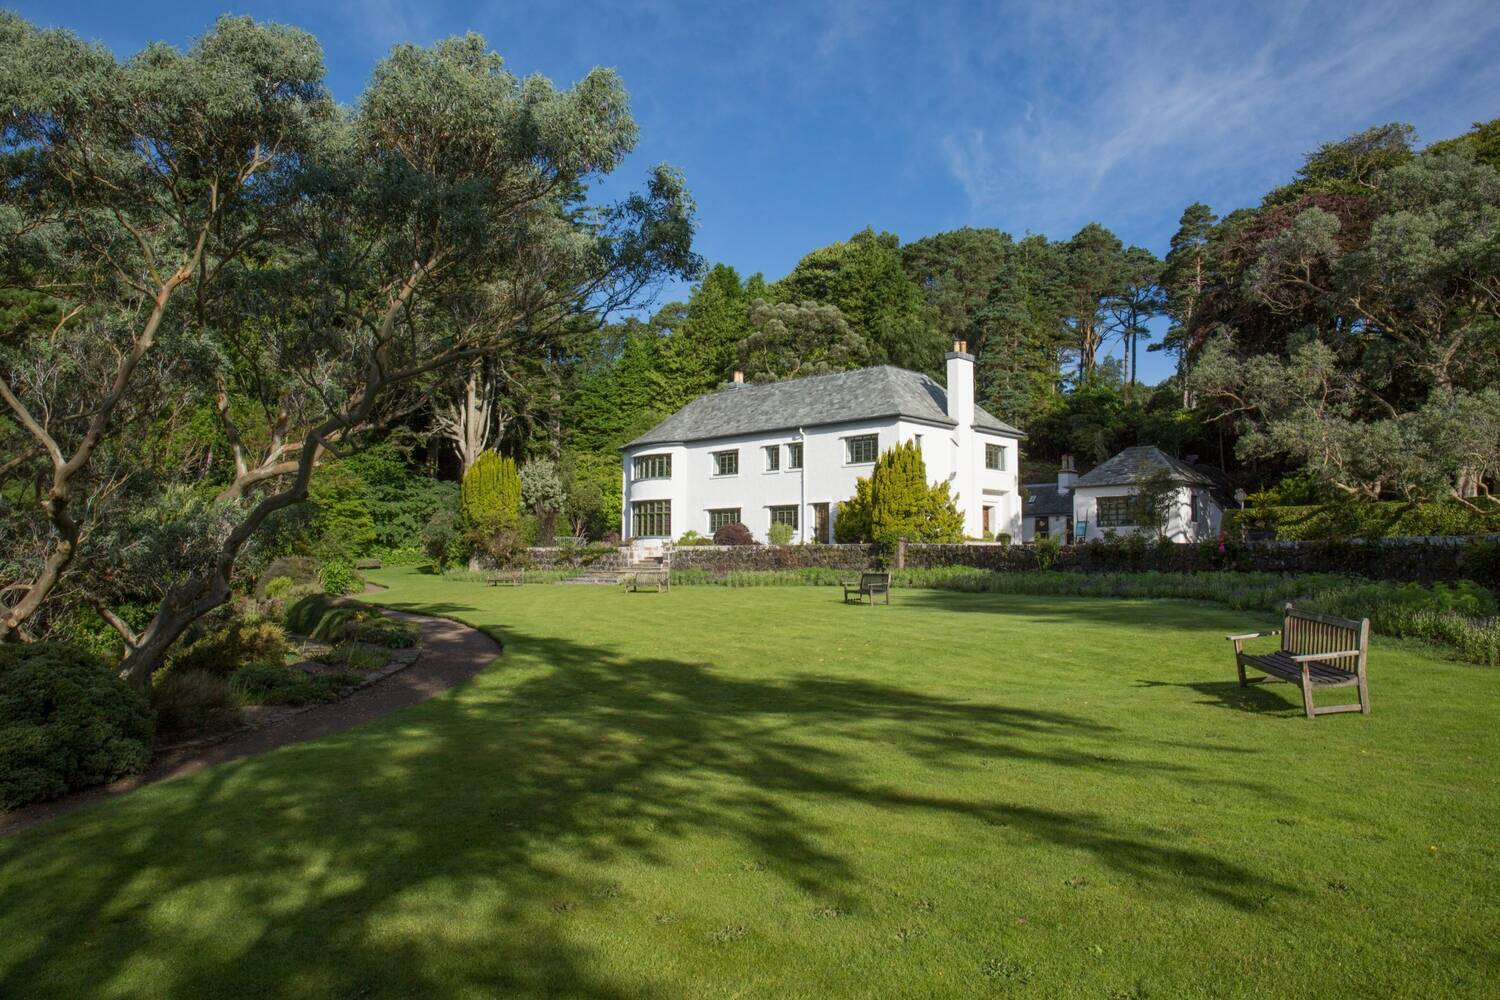 A view of the white stone Inverewe House, sitting at the centre of a large garden. A large lawn area is in the foreground surrounded by tall trees. A wooden garden bench sits in the middle of the lawn.